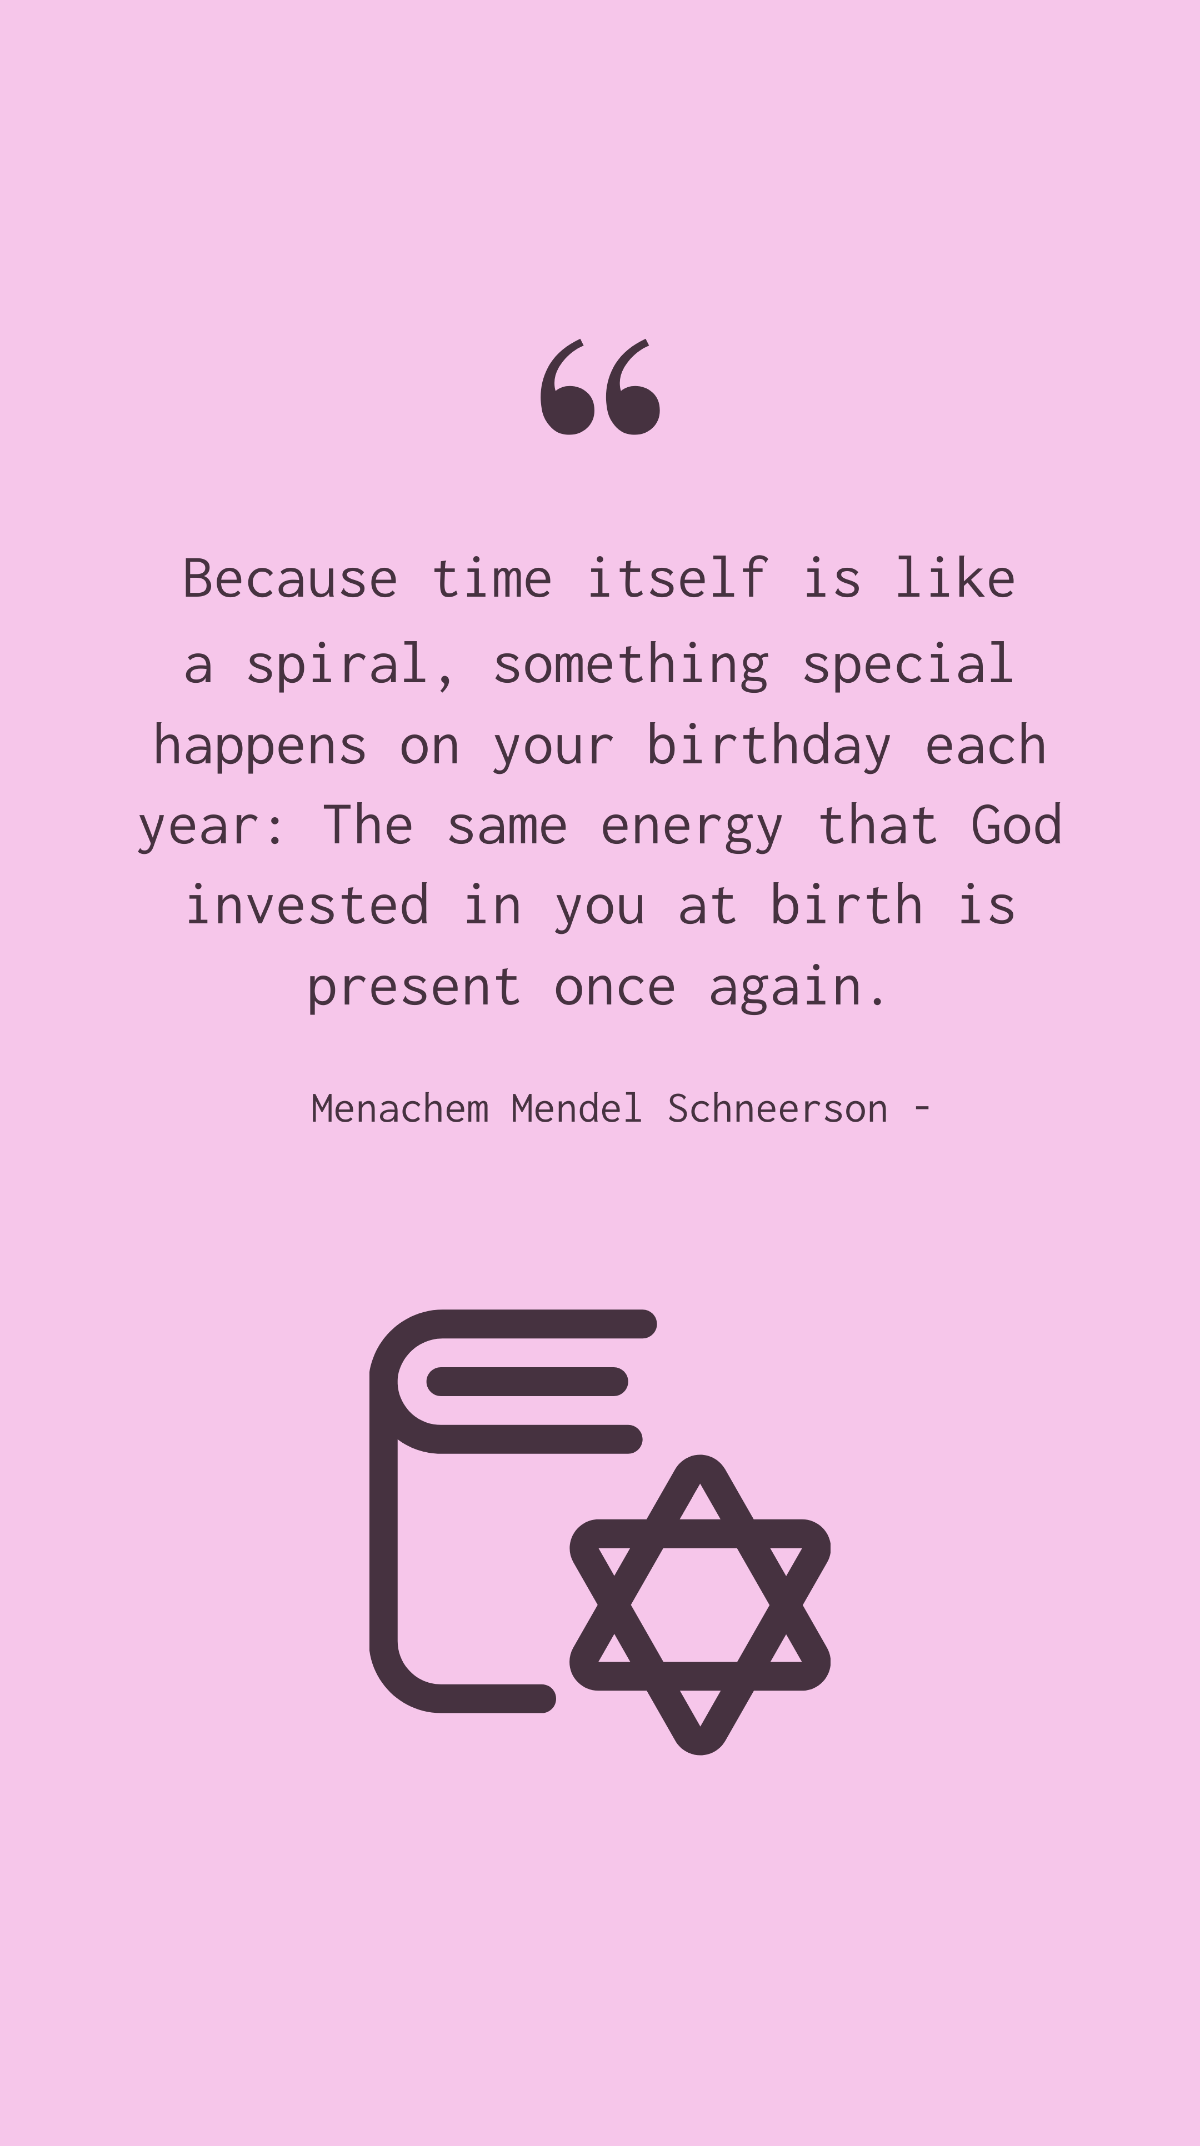 Menachem Mendel Schneerson - Because time itself is like a spiral, something special happens on your birthday each year: The same energy that God invested in you at birth is present once again. Templa